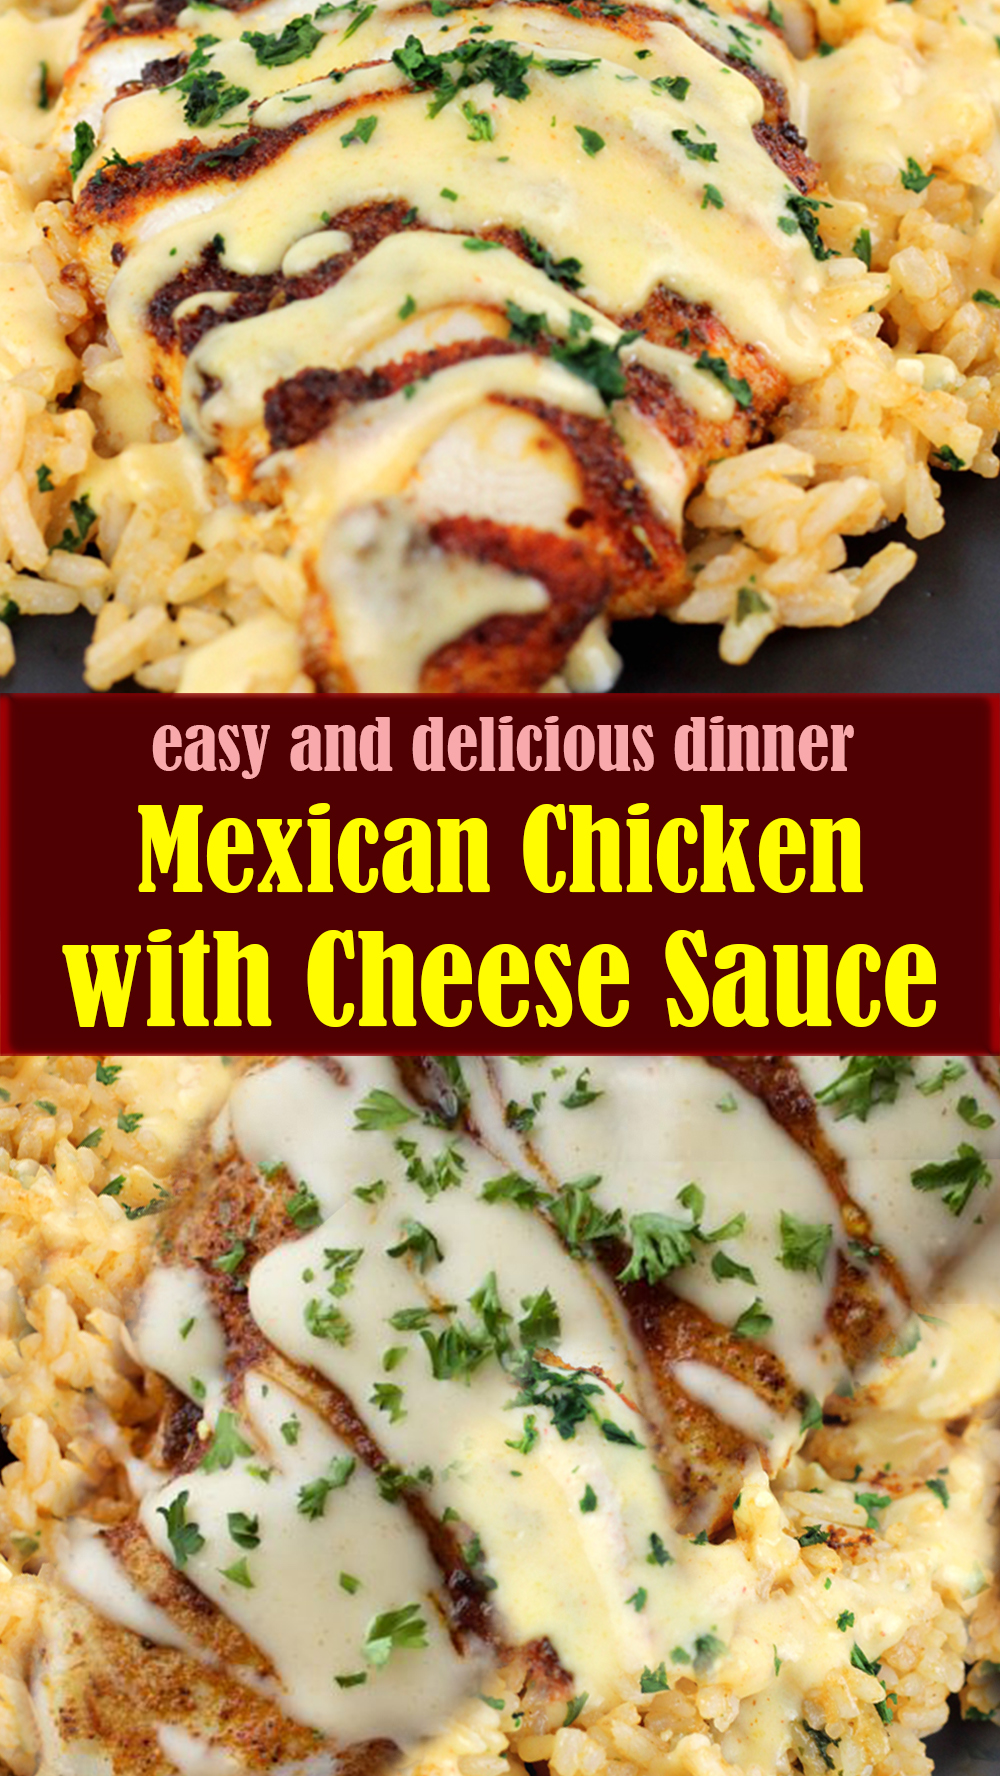 Easy Mexican Chicken with Cheese Sauce